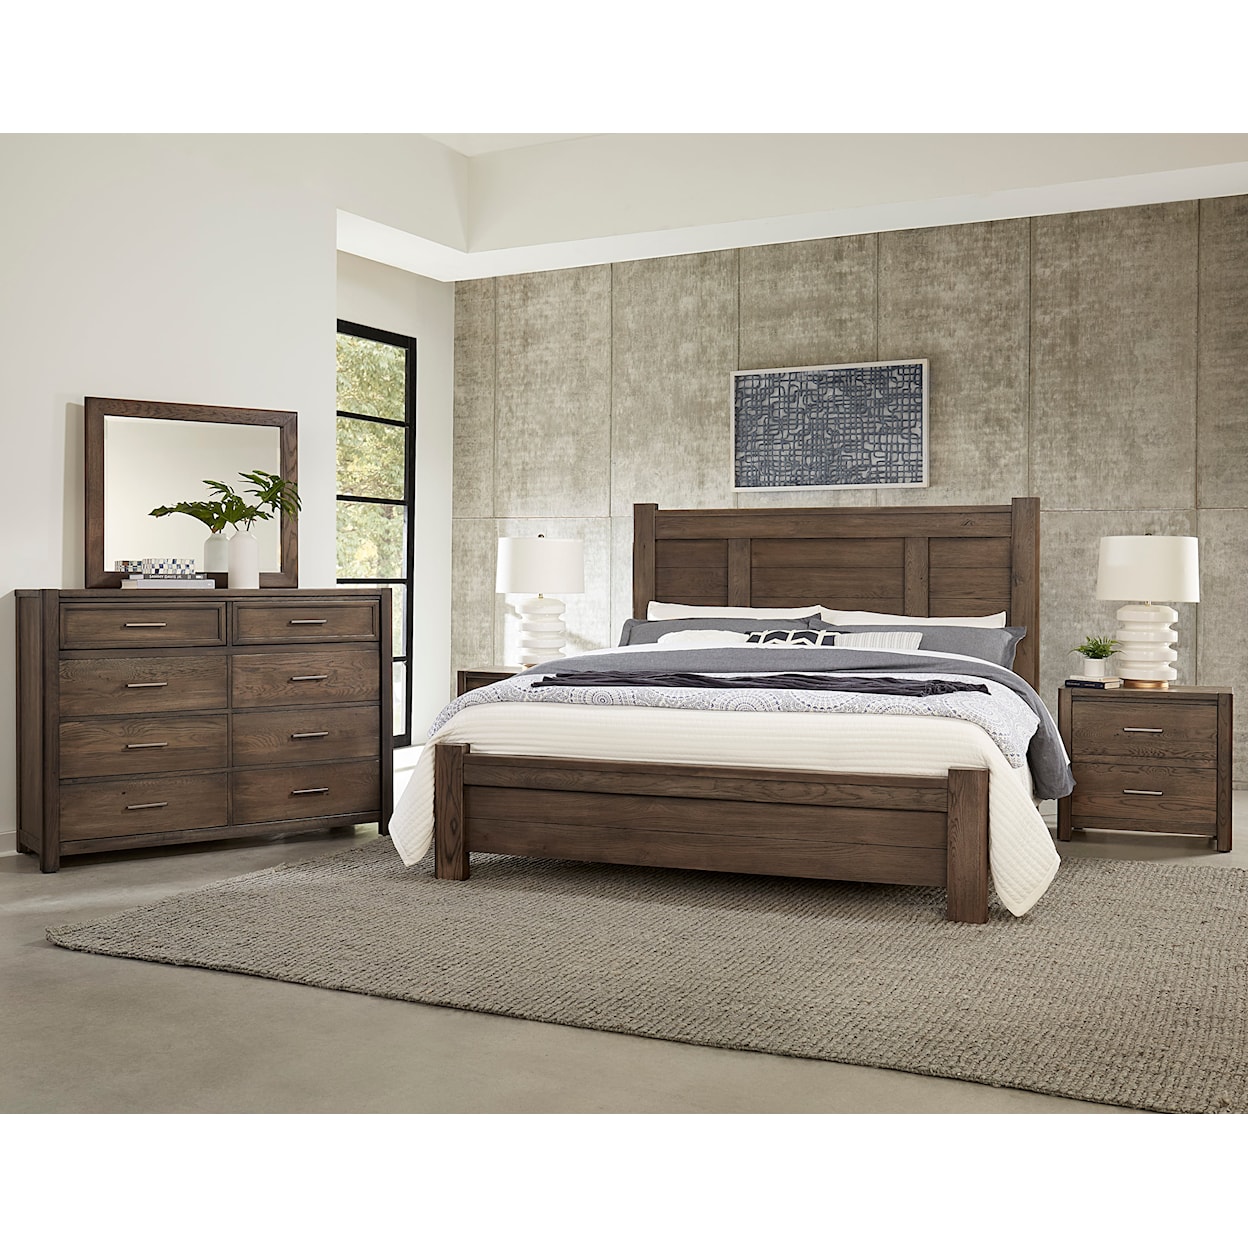 Vaughan Bassett Crafted Oak - Aged Grey Queen Poster Bed